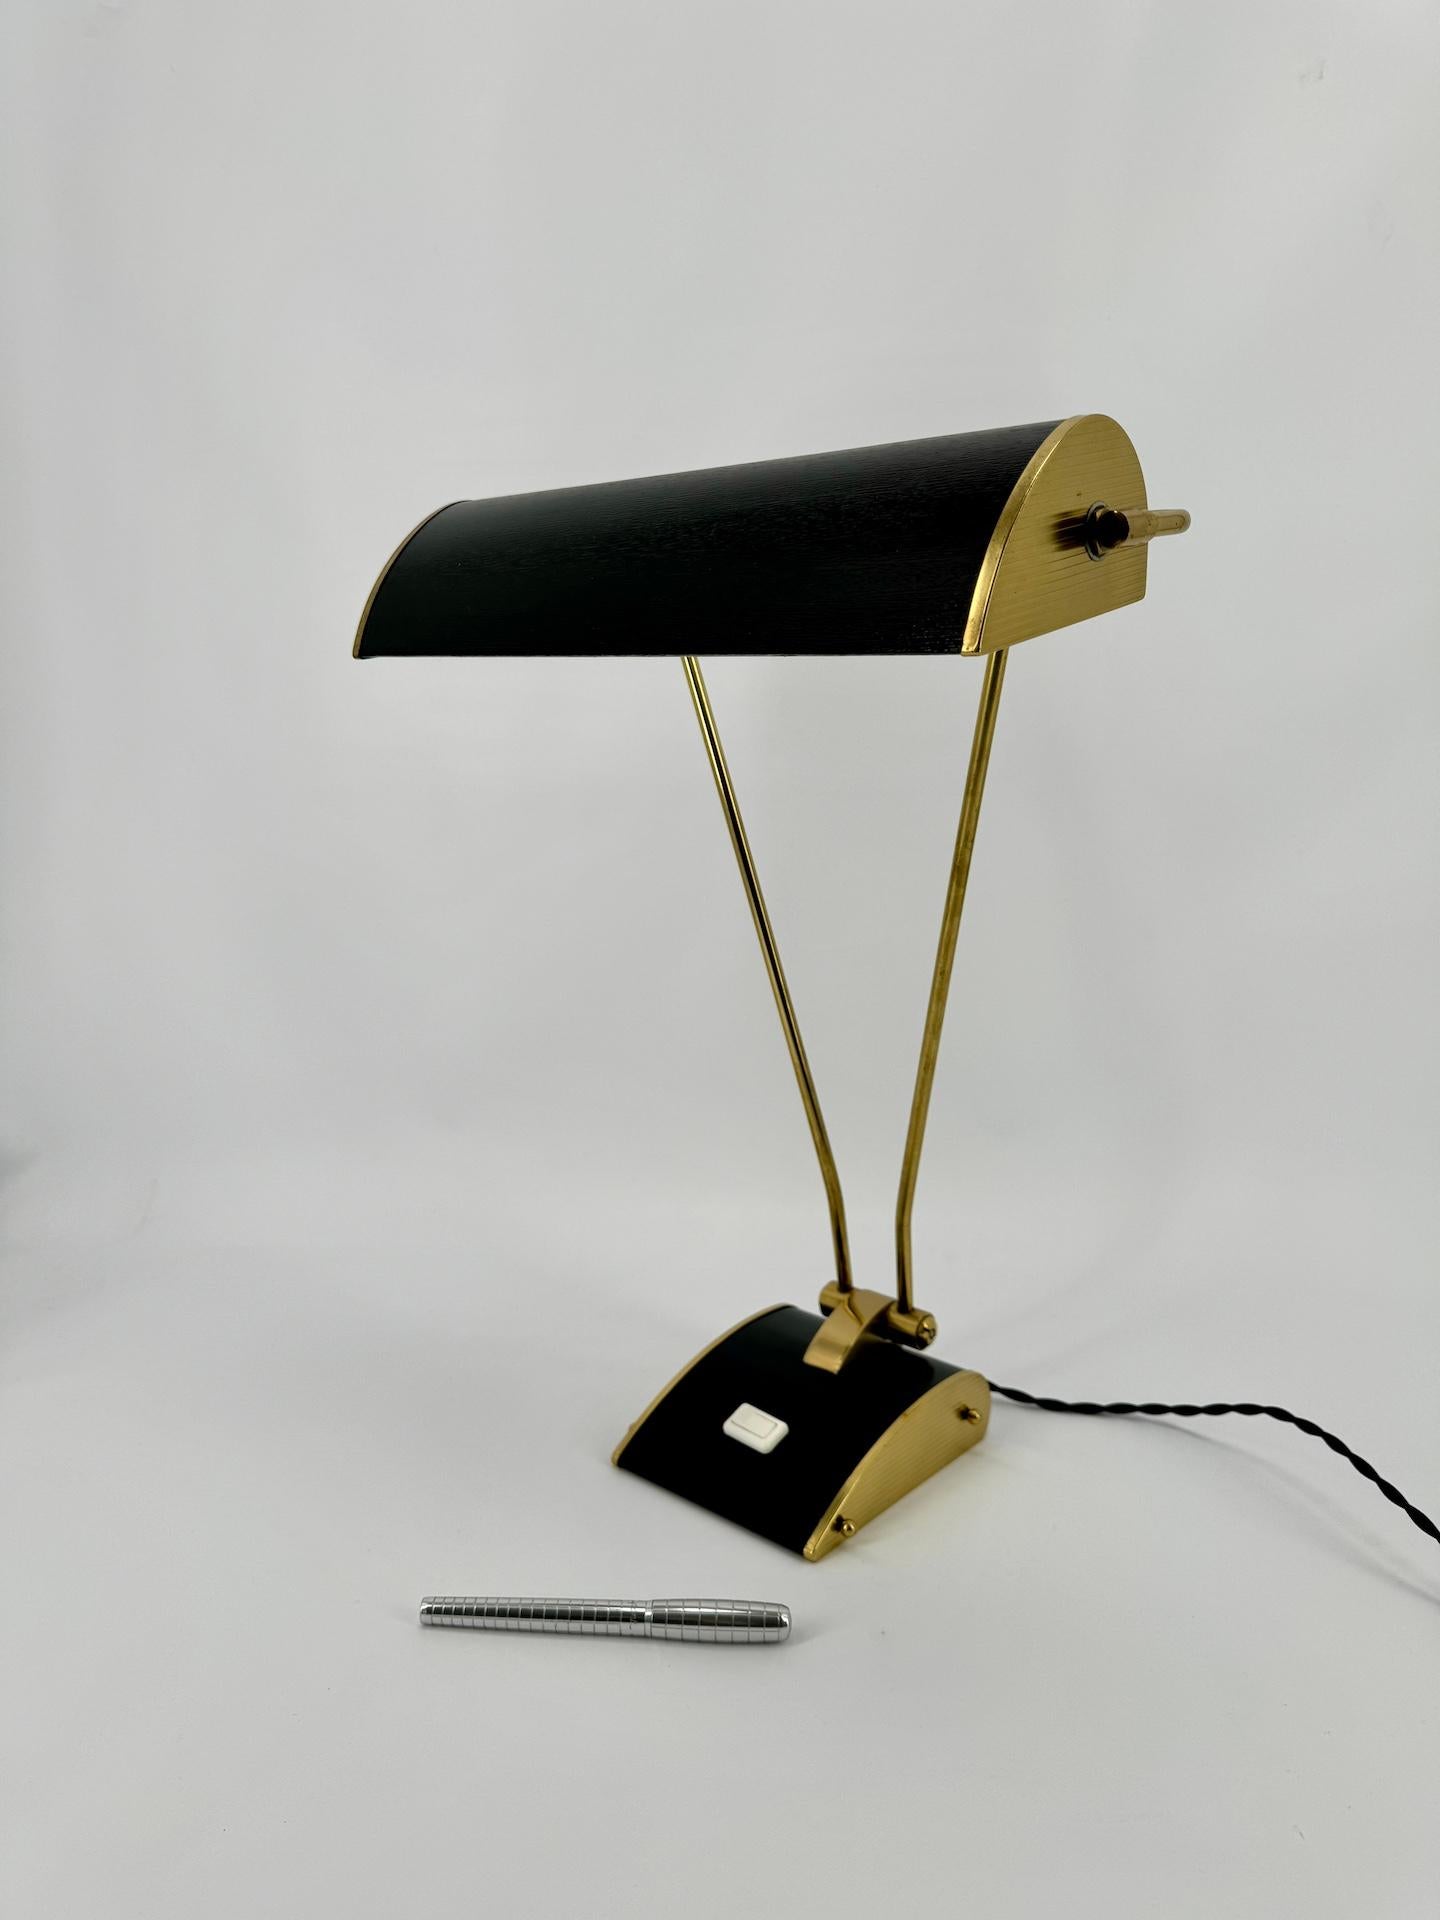 French Art Deco Style Table Lamp by JUMO in Black And Brass Finish France Circa 1950